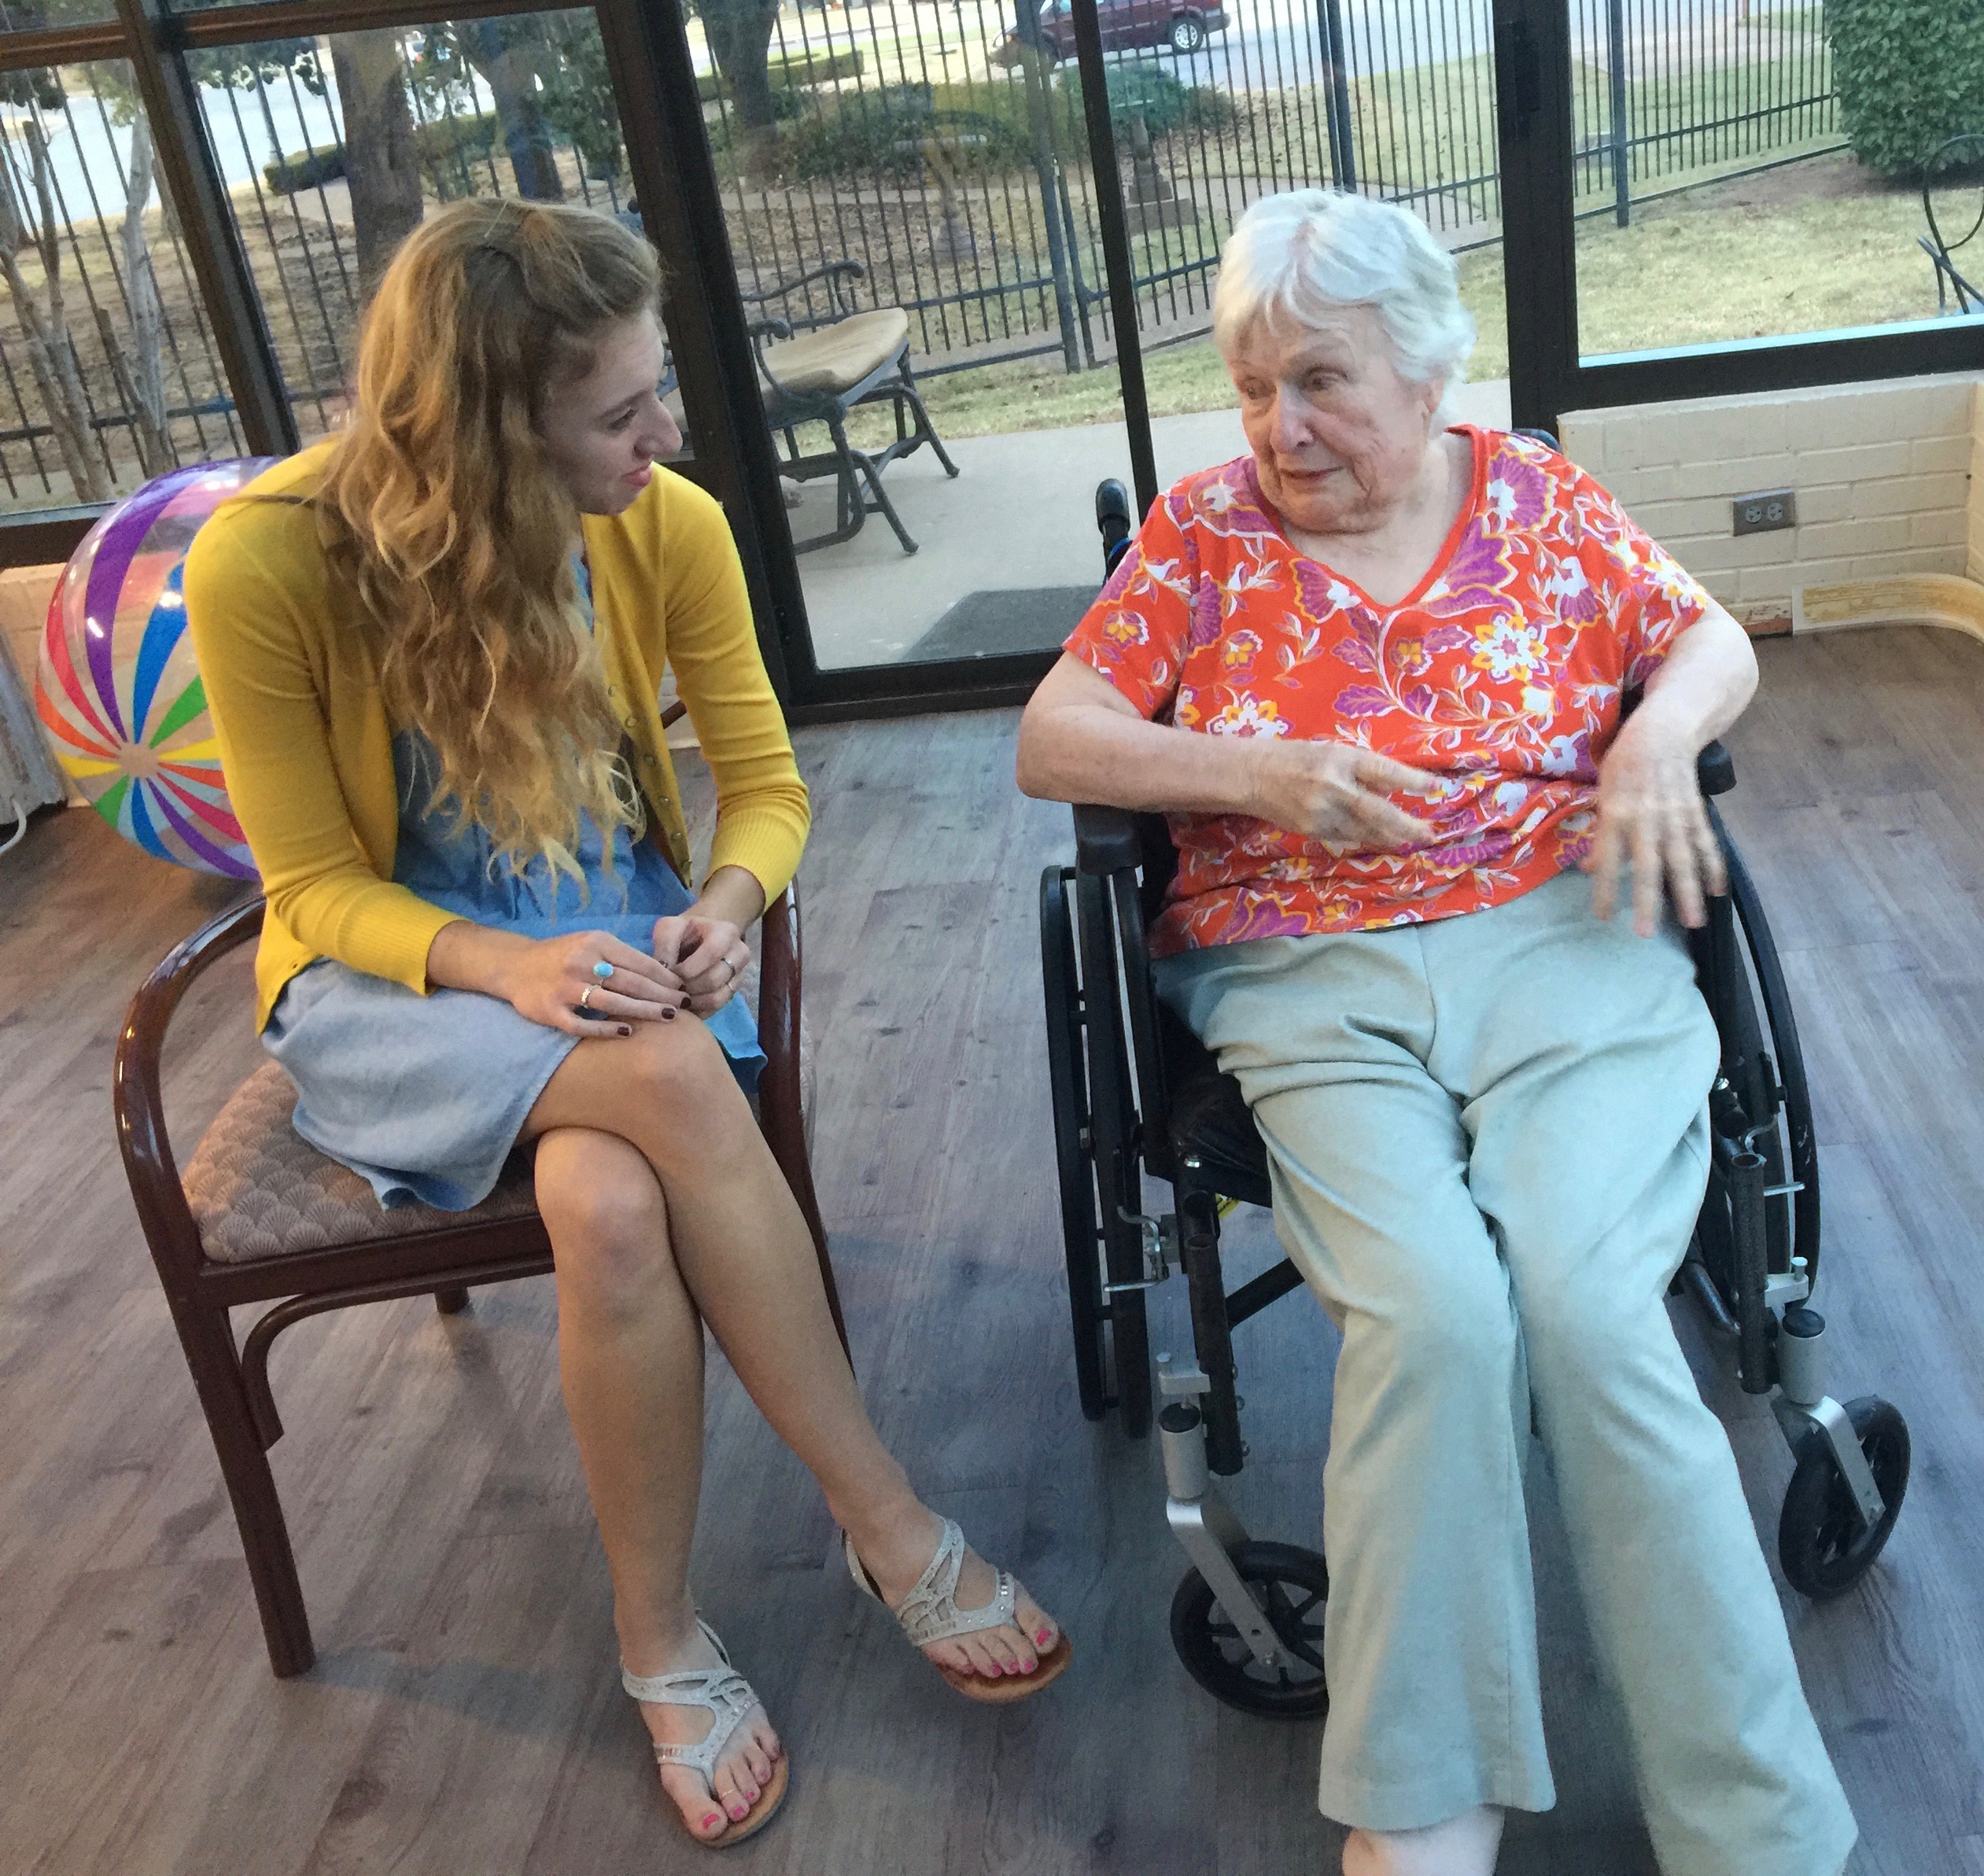 Music and Memory Team member Andrea Larson talking with one of the residents at the Baptist Village Community retirement facility.